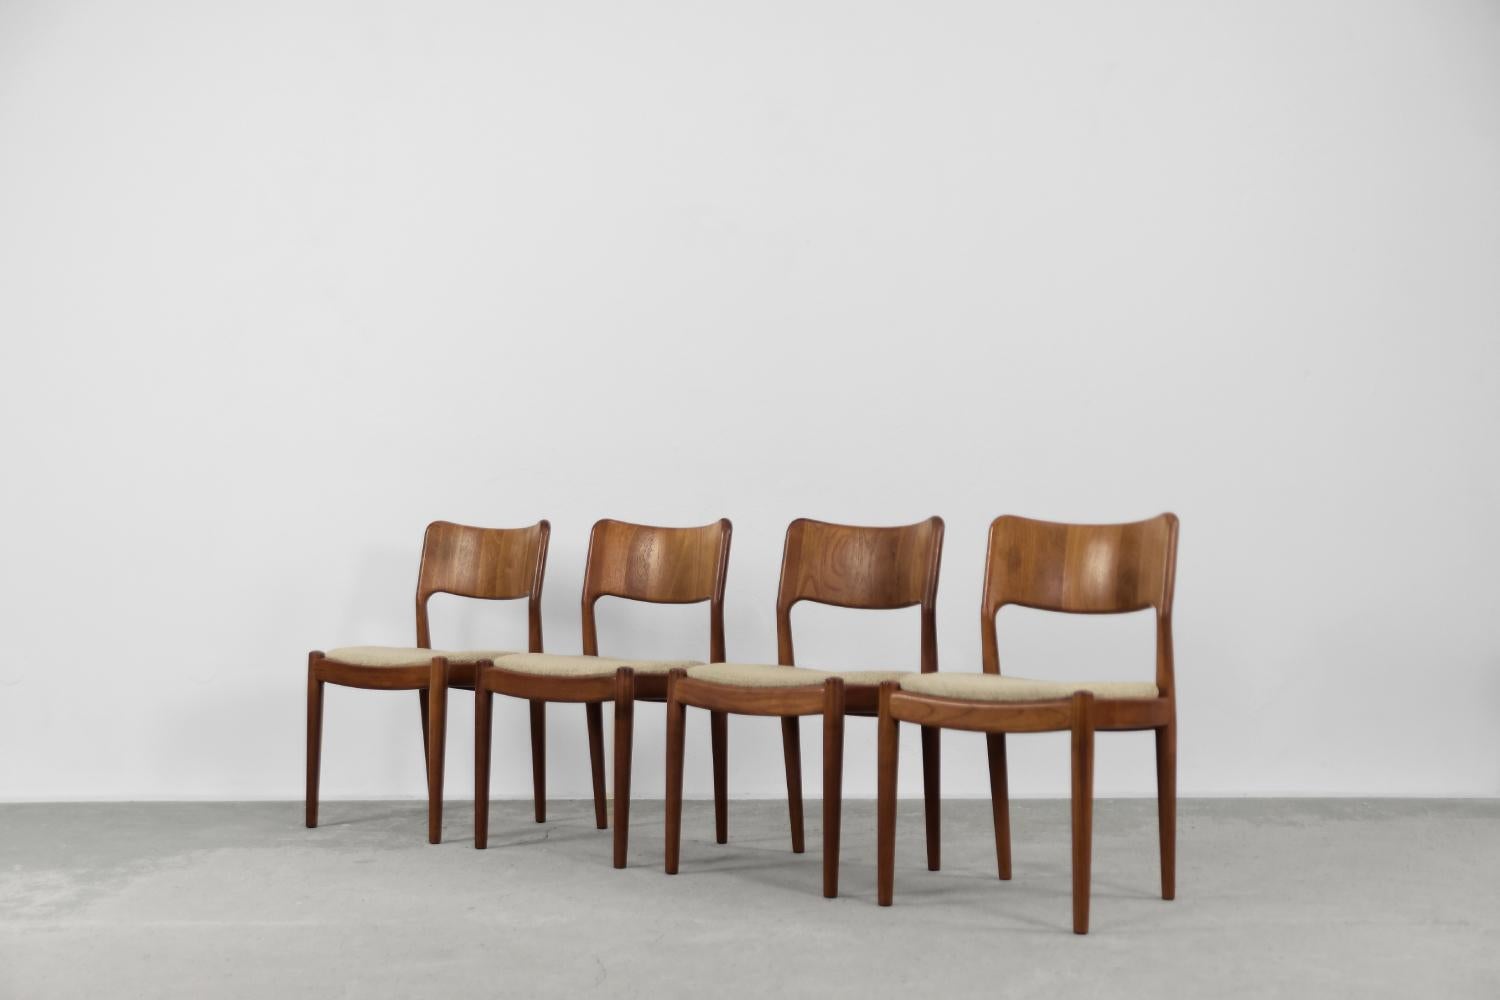 This set of four modernist chairs was manufactured by the Danish manufacturer Glostrup Møbelfabrik during the 1960s. They are made of solid teak in a warm shade of brown. The seat is upholstered with a high-quality, thick, light-colored woolen